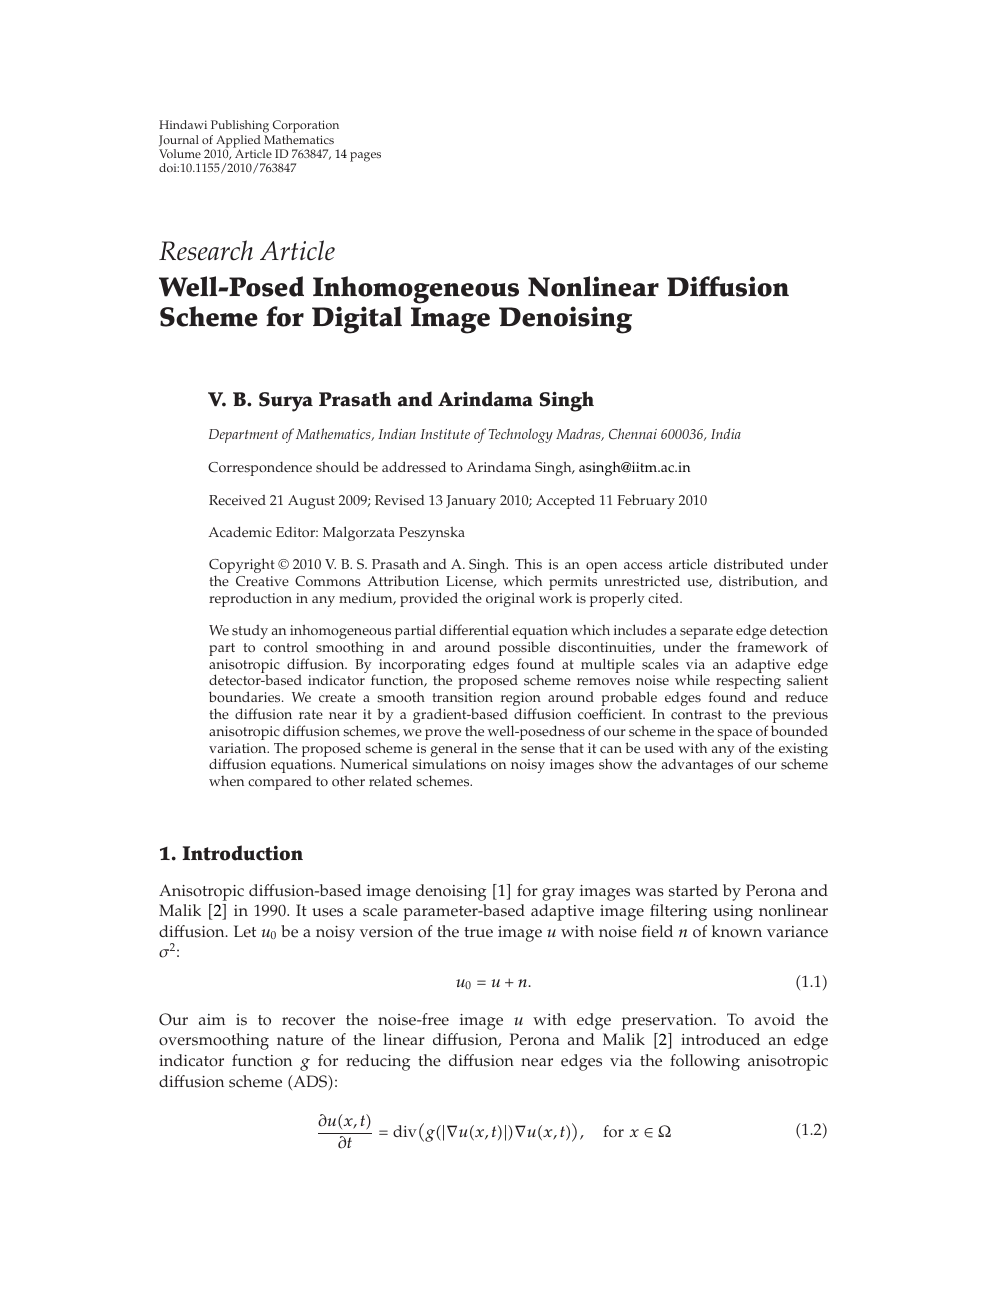 Well Posed Inhomogeneous Nonlinear Diffusion Scheme For Digital Image Denoising Topic Of Research Paper In Mathematics Download Scholarly Article Pdf And Read For Free On Cyberleninka Open Science Hub